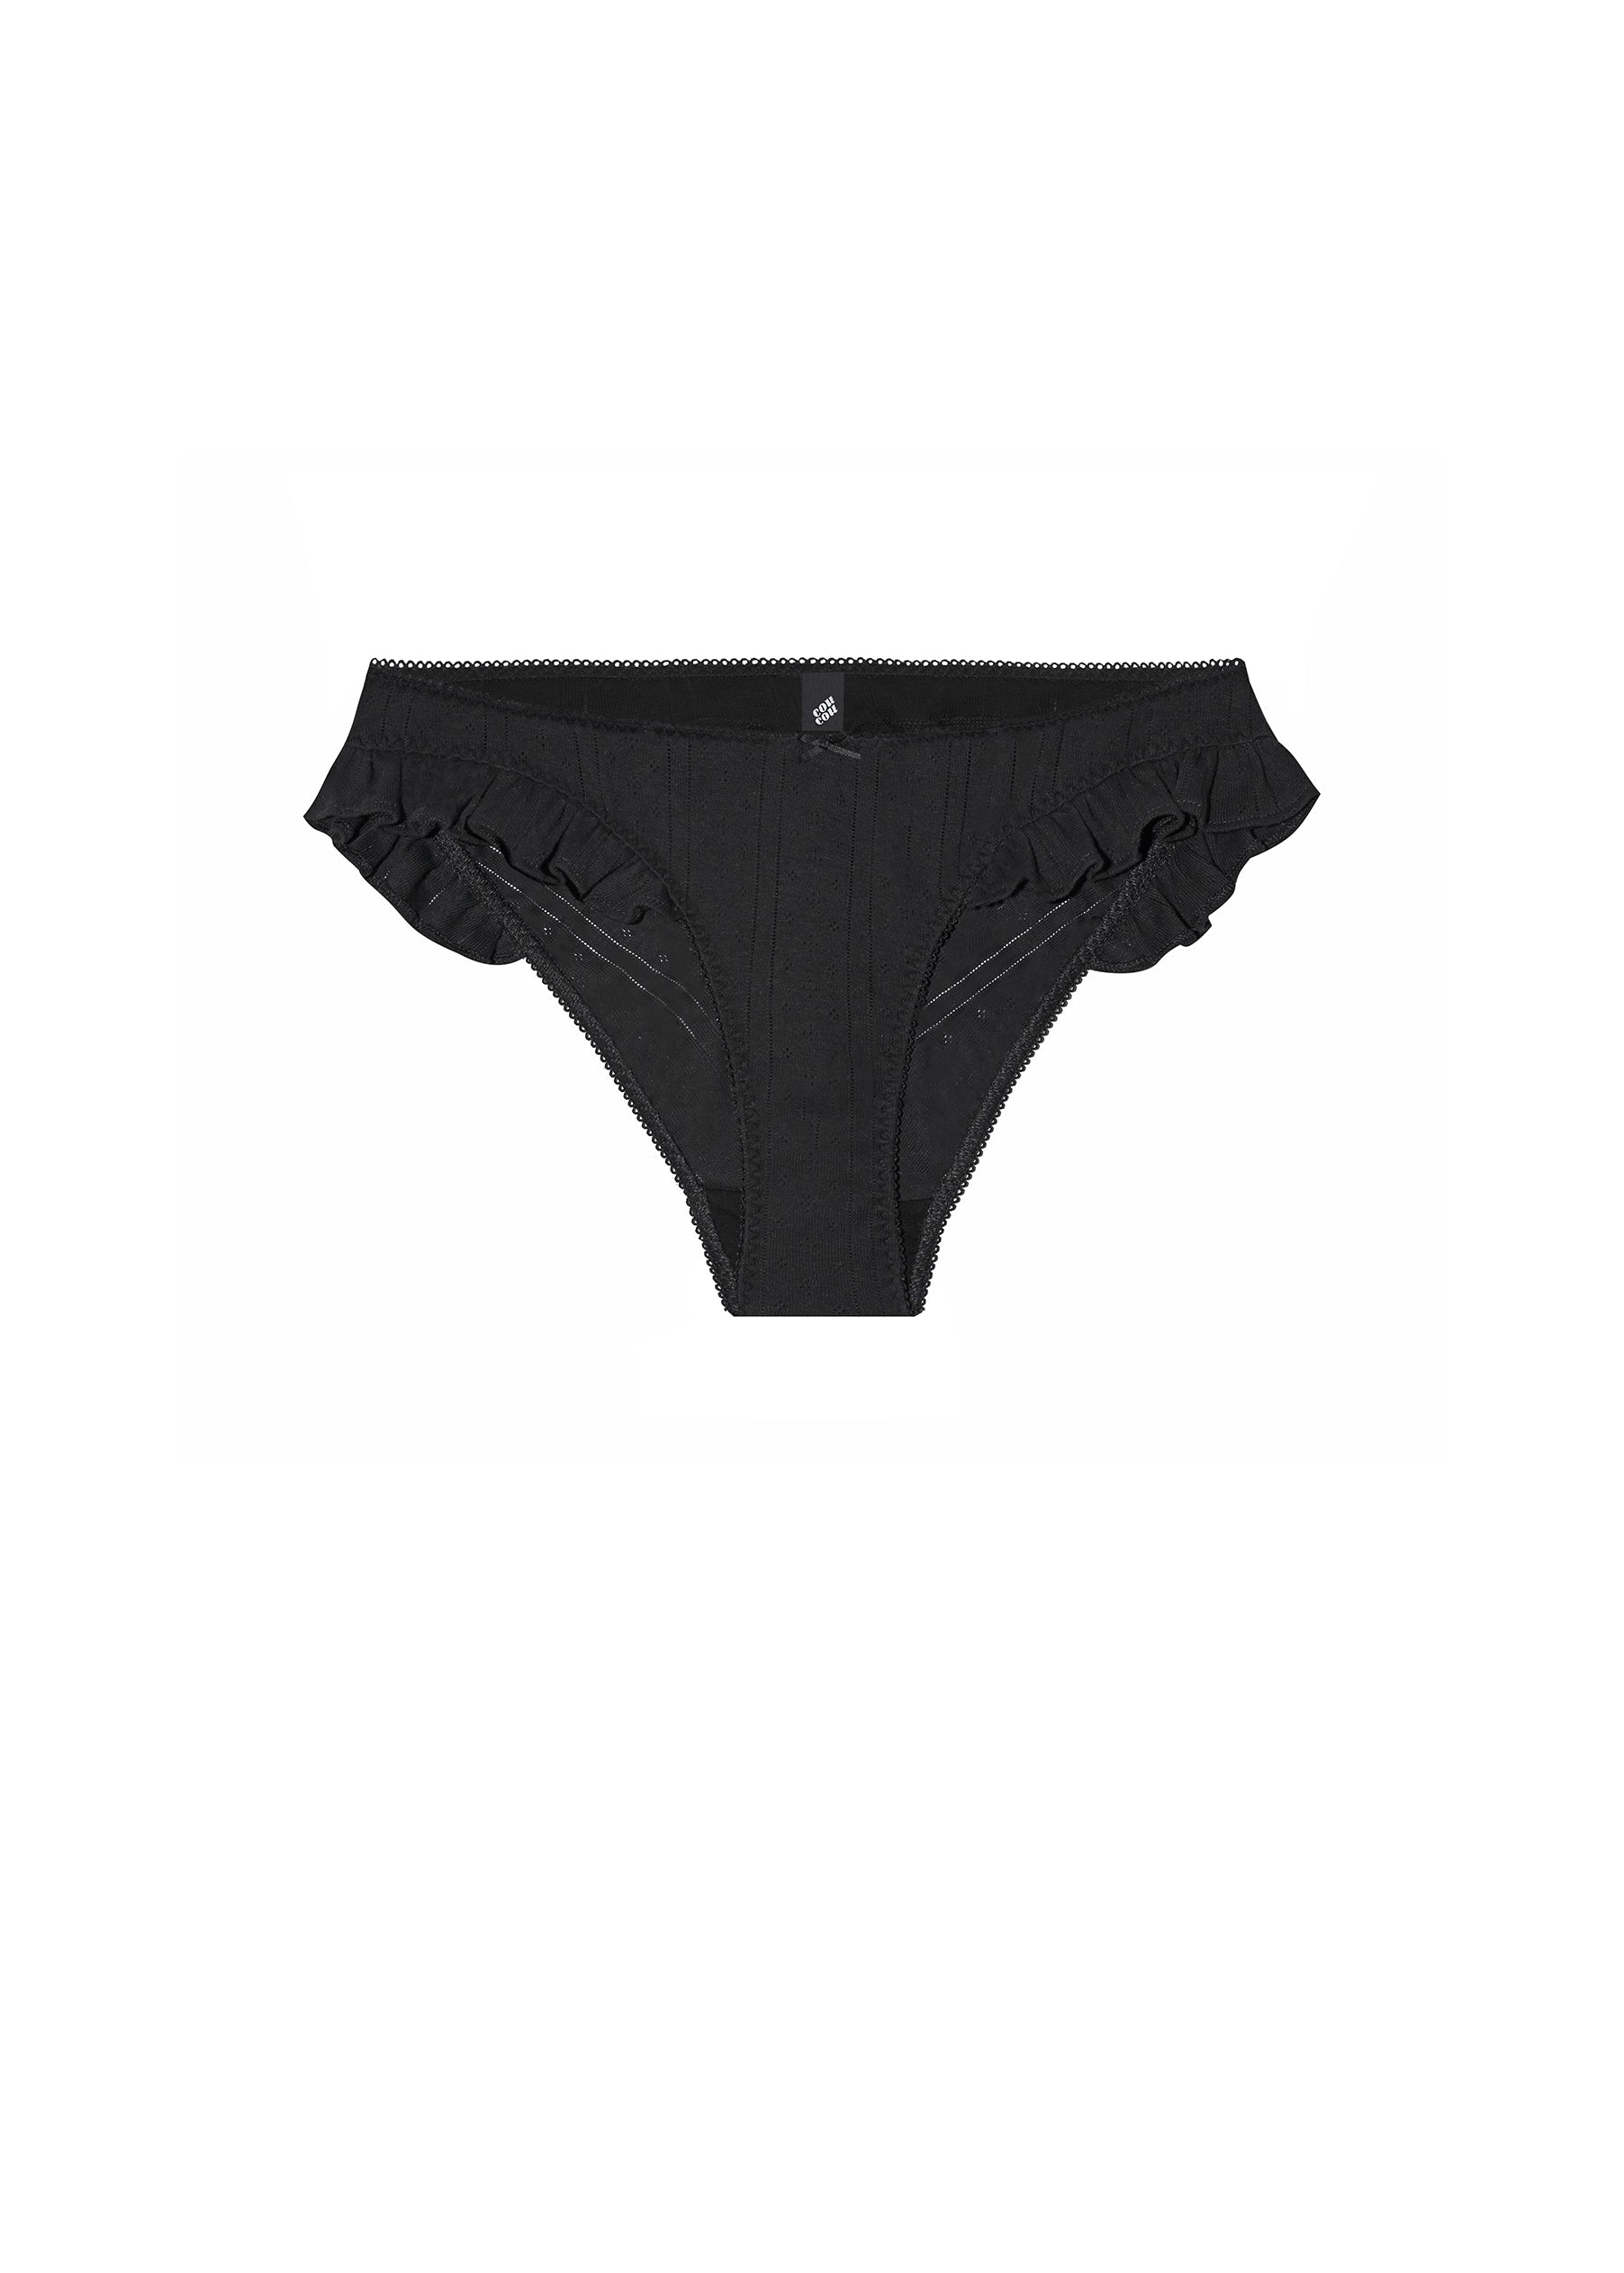 The Butterfly Brief Black